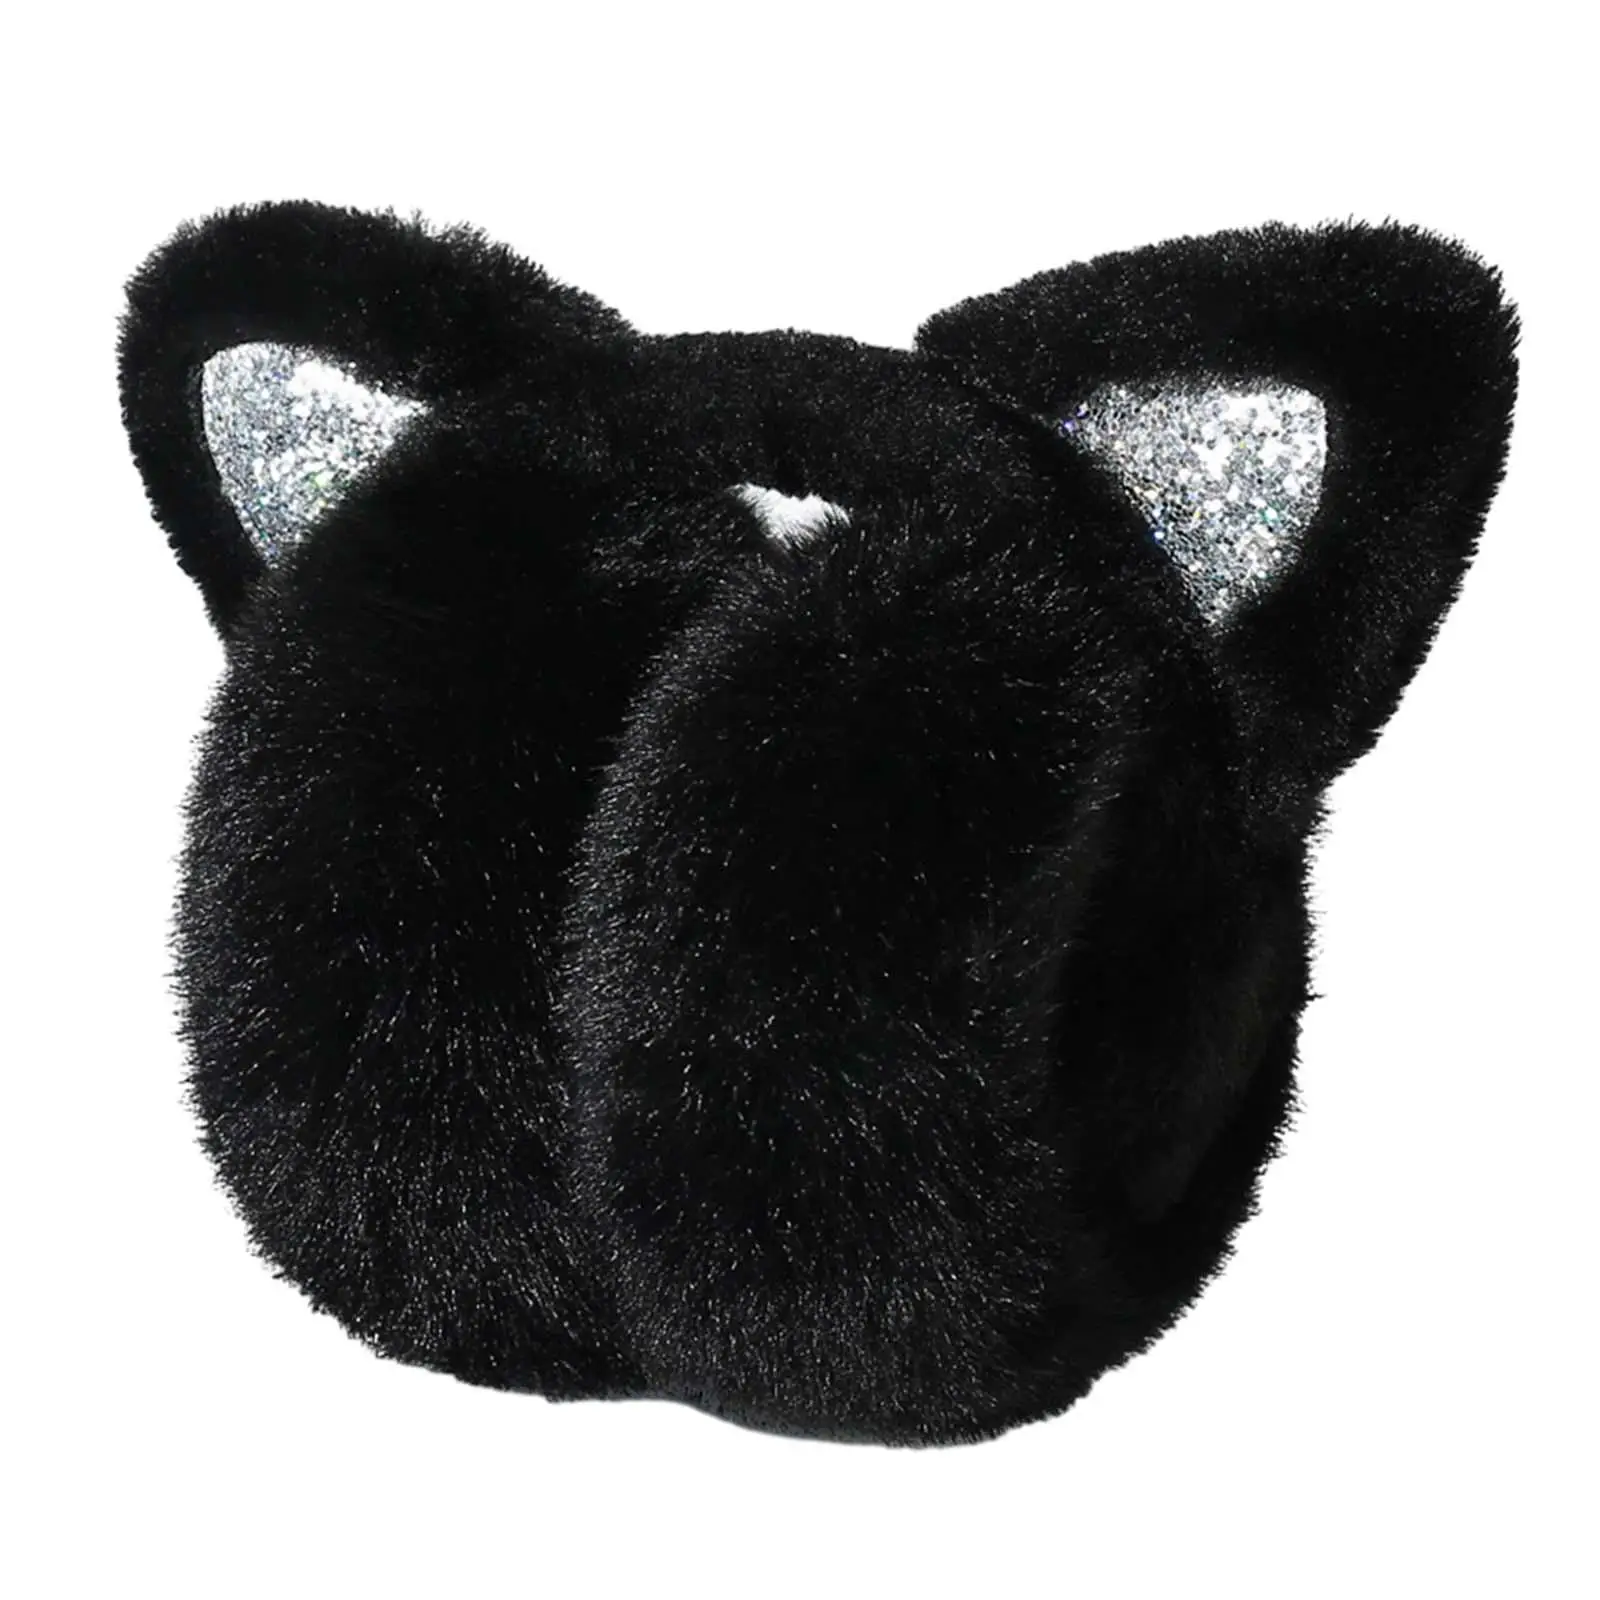 Ear Warmers Polyester Folded Comfortable Winter Ear Muffs Earmuffs for Skating Traveling Outdoor Activities Riding Cold Weather